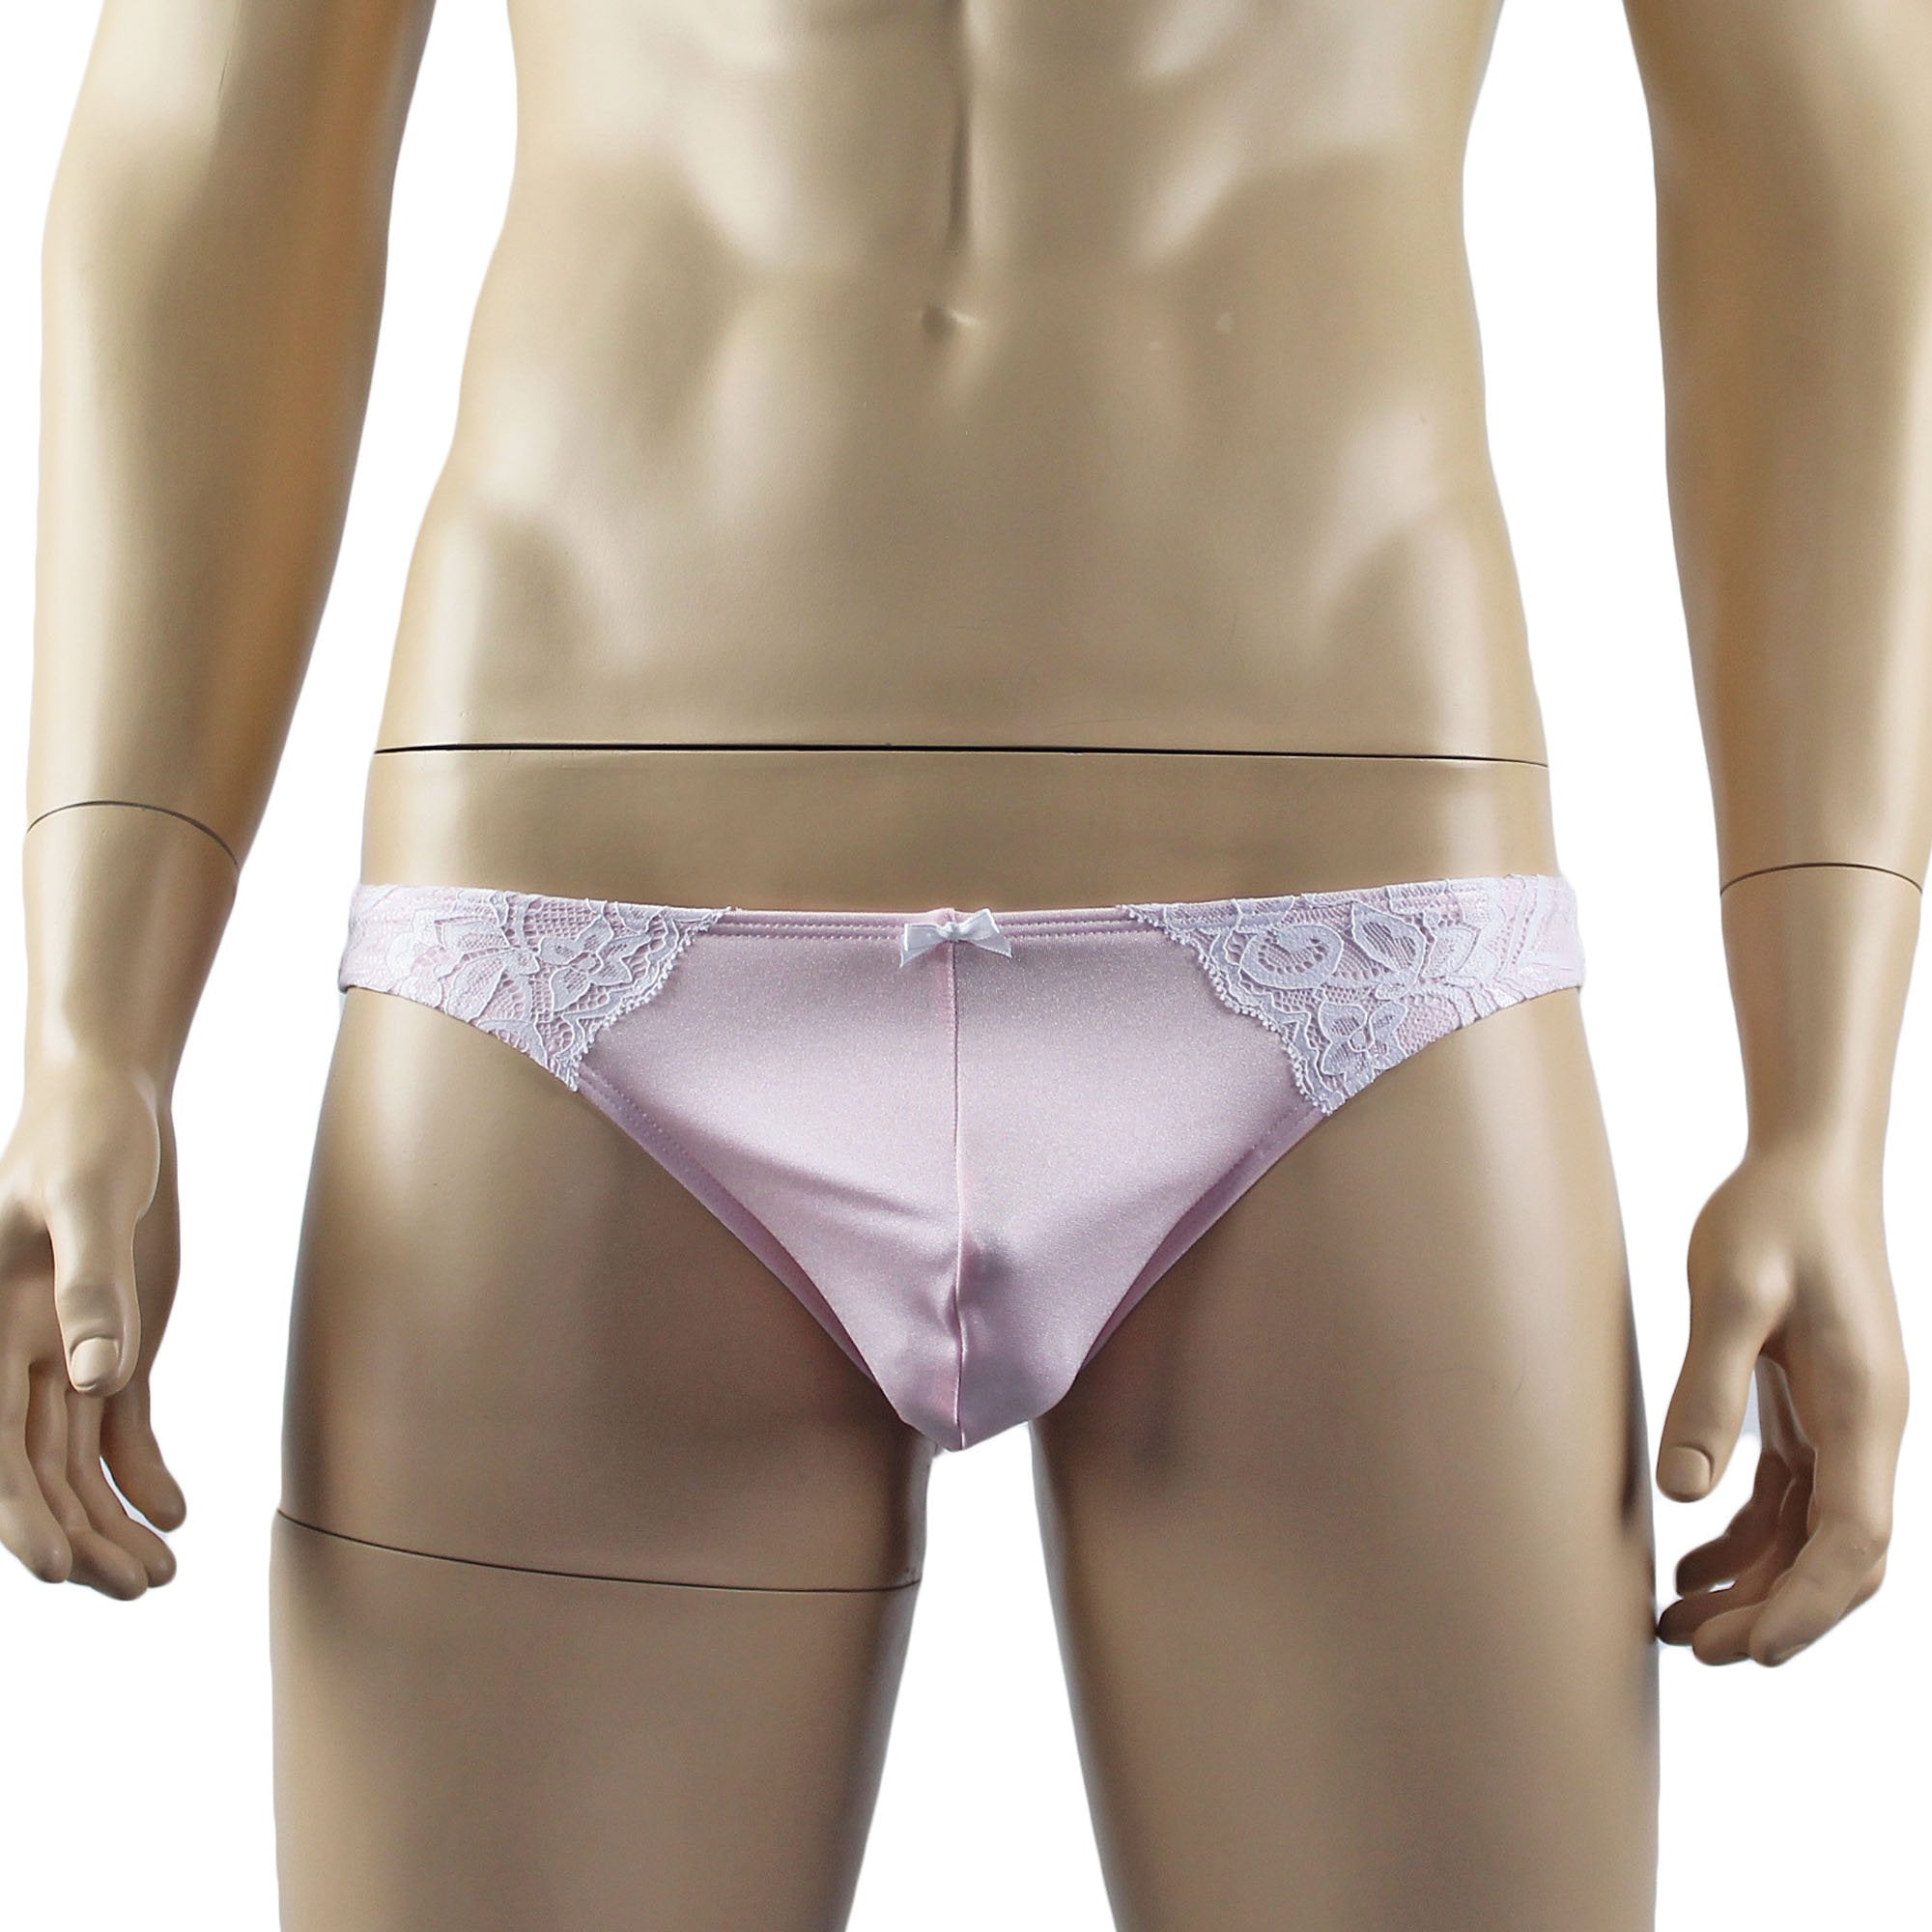 Mens Isabel Panty Stretch Spandex & Lace Bikini Brief with Sexy Back Light Pink and White Lace